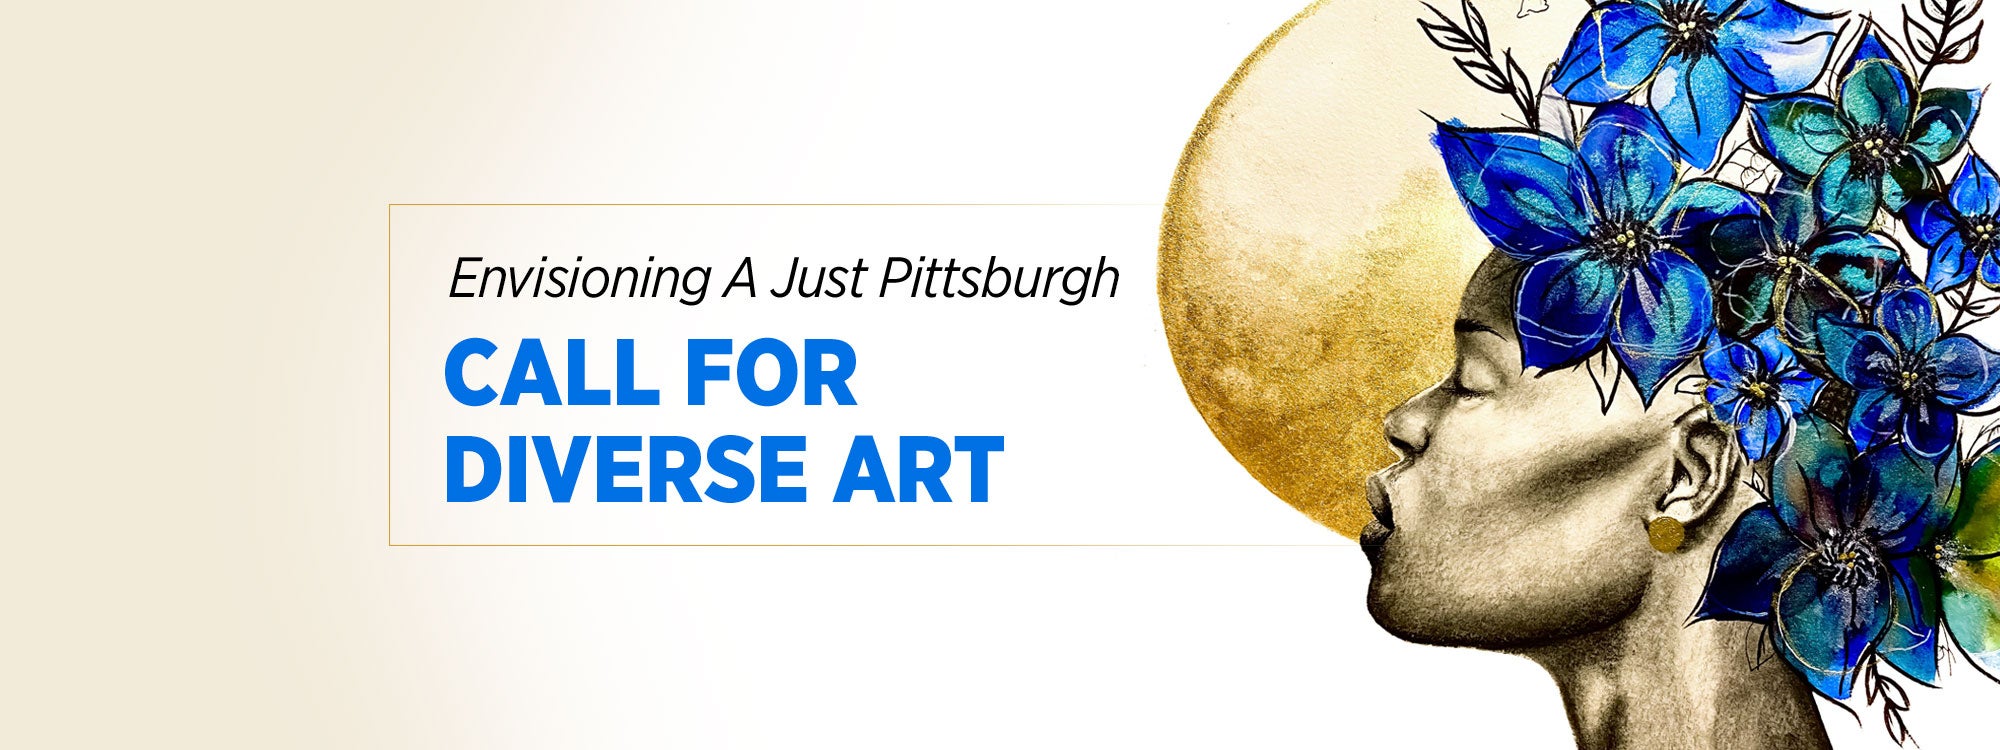 "Image of a woman with the caption, Envisioning a Just Pittsburgh - Call for Diverse Art"